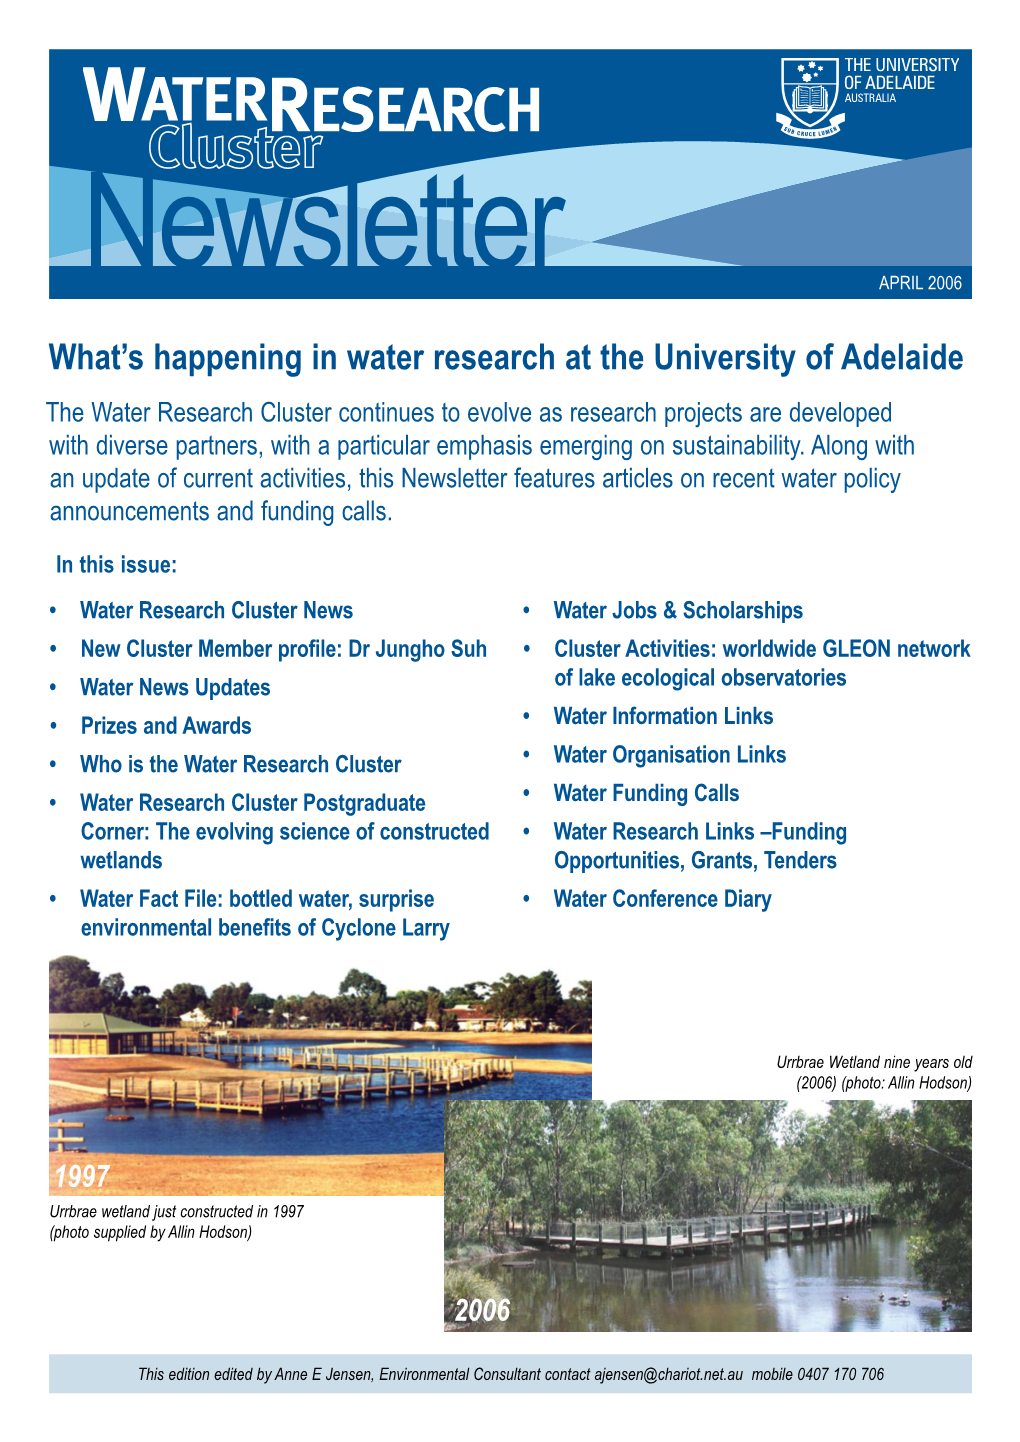 What's Happening in Water Research at the University of Adelaide